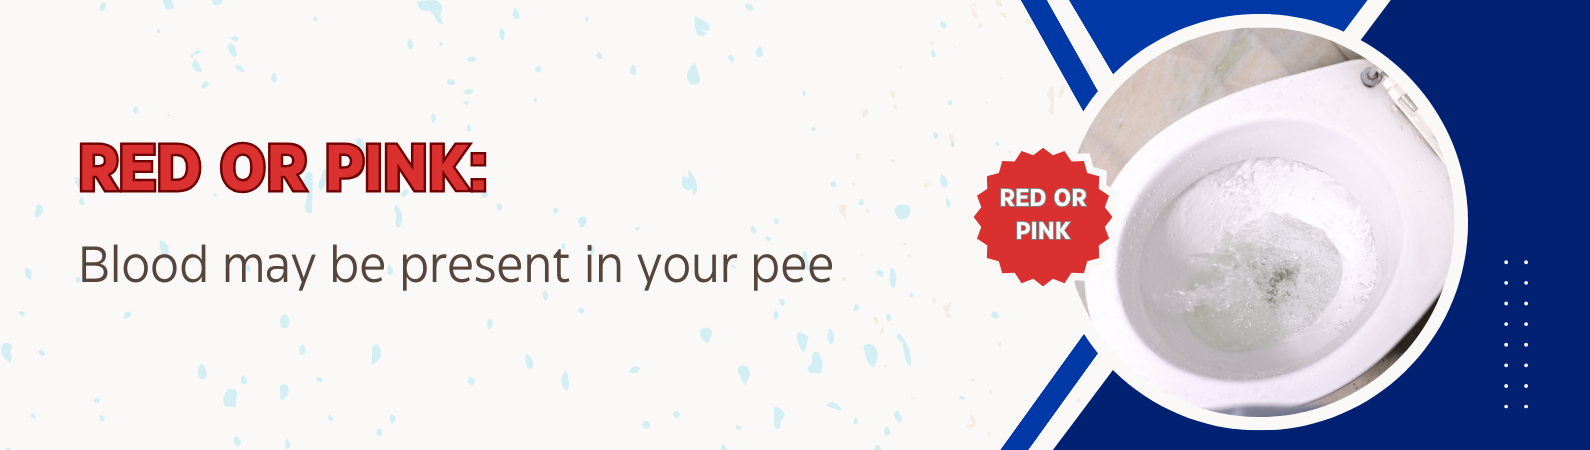 Red or pink: blood may be present in your pee